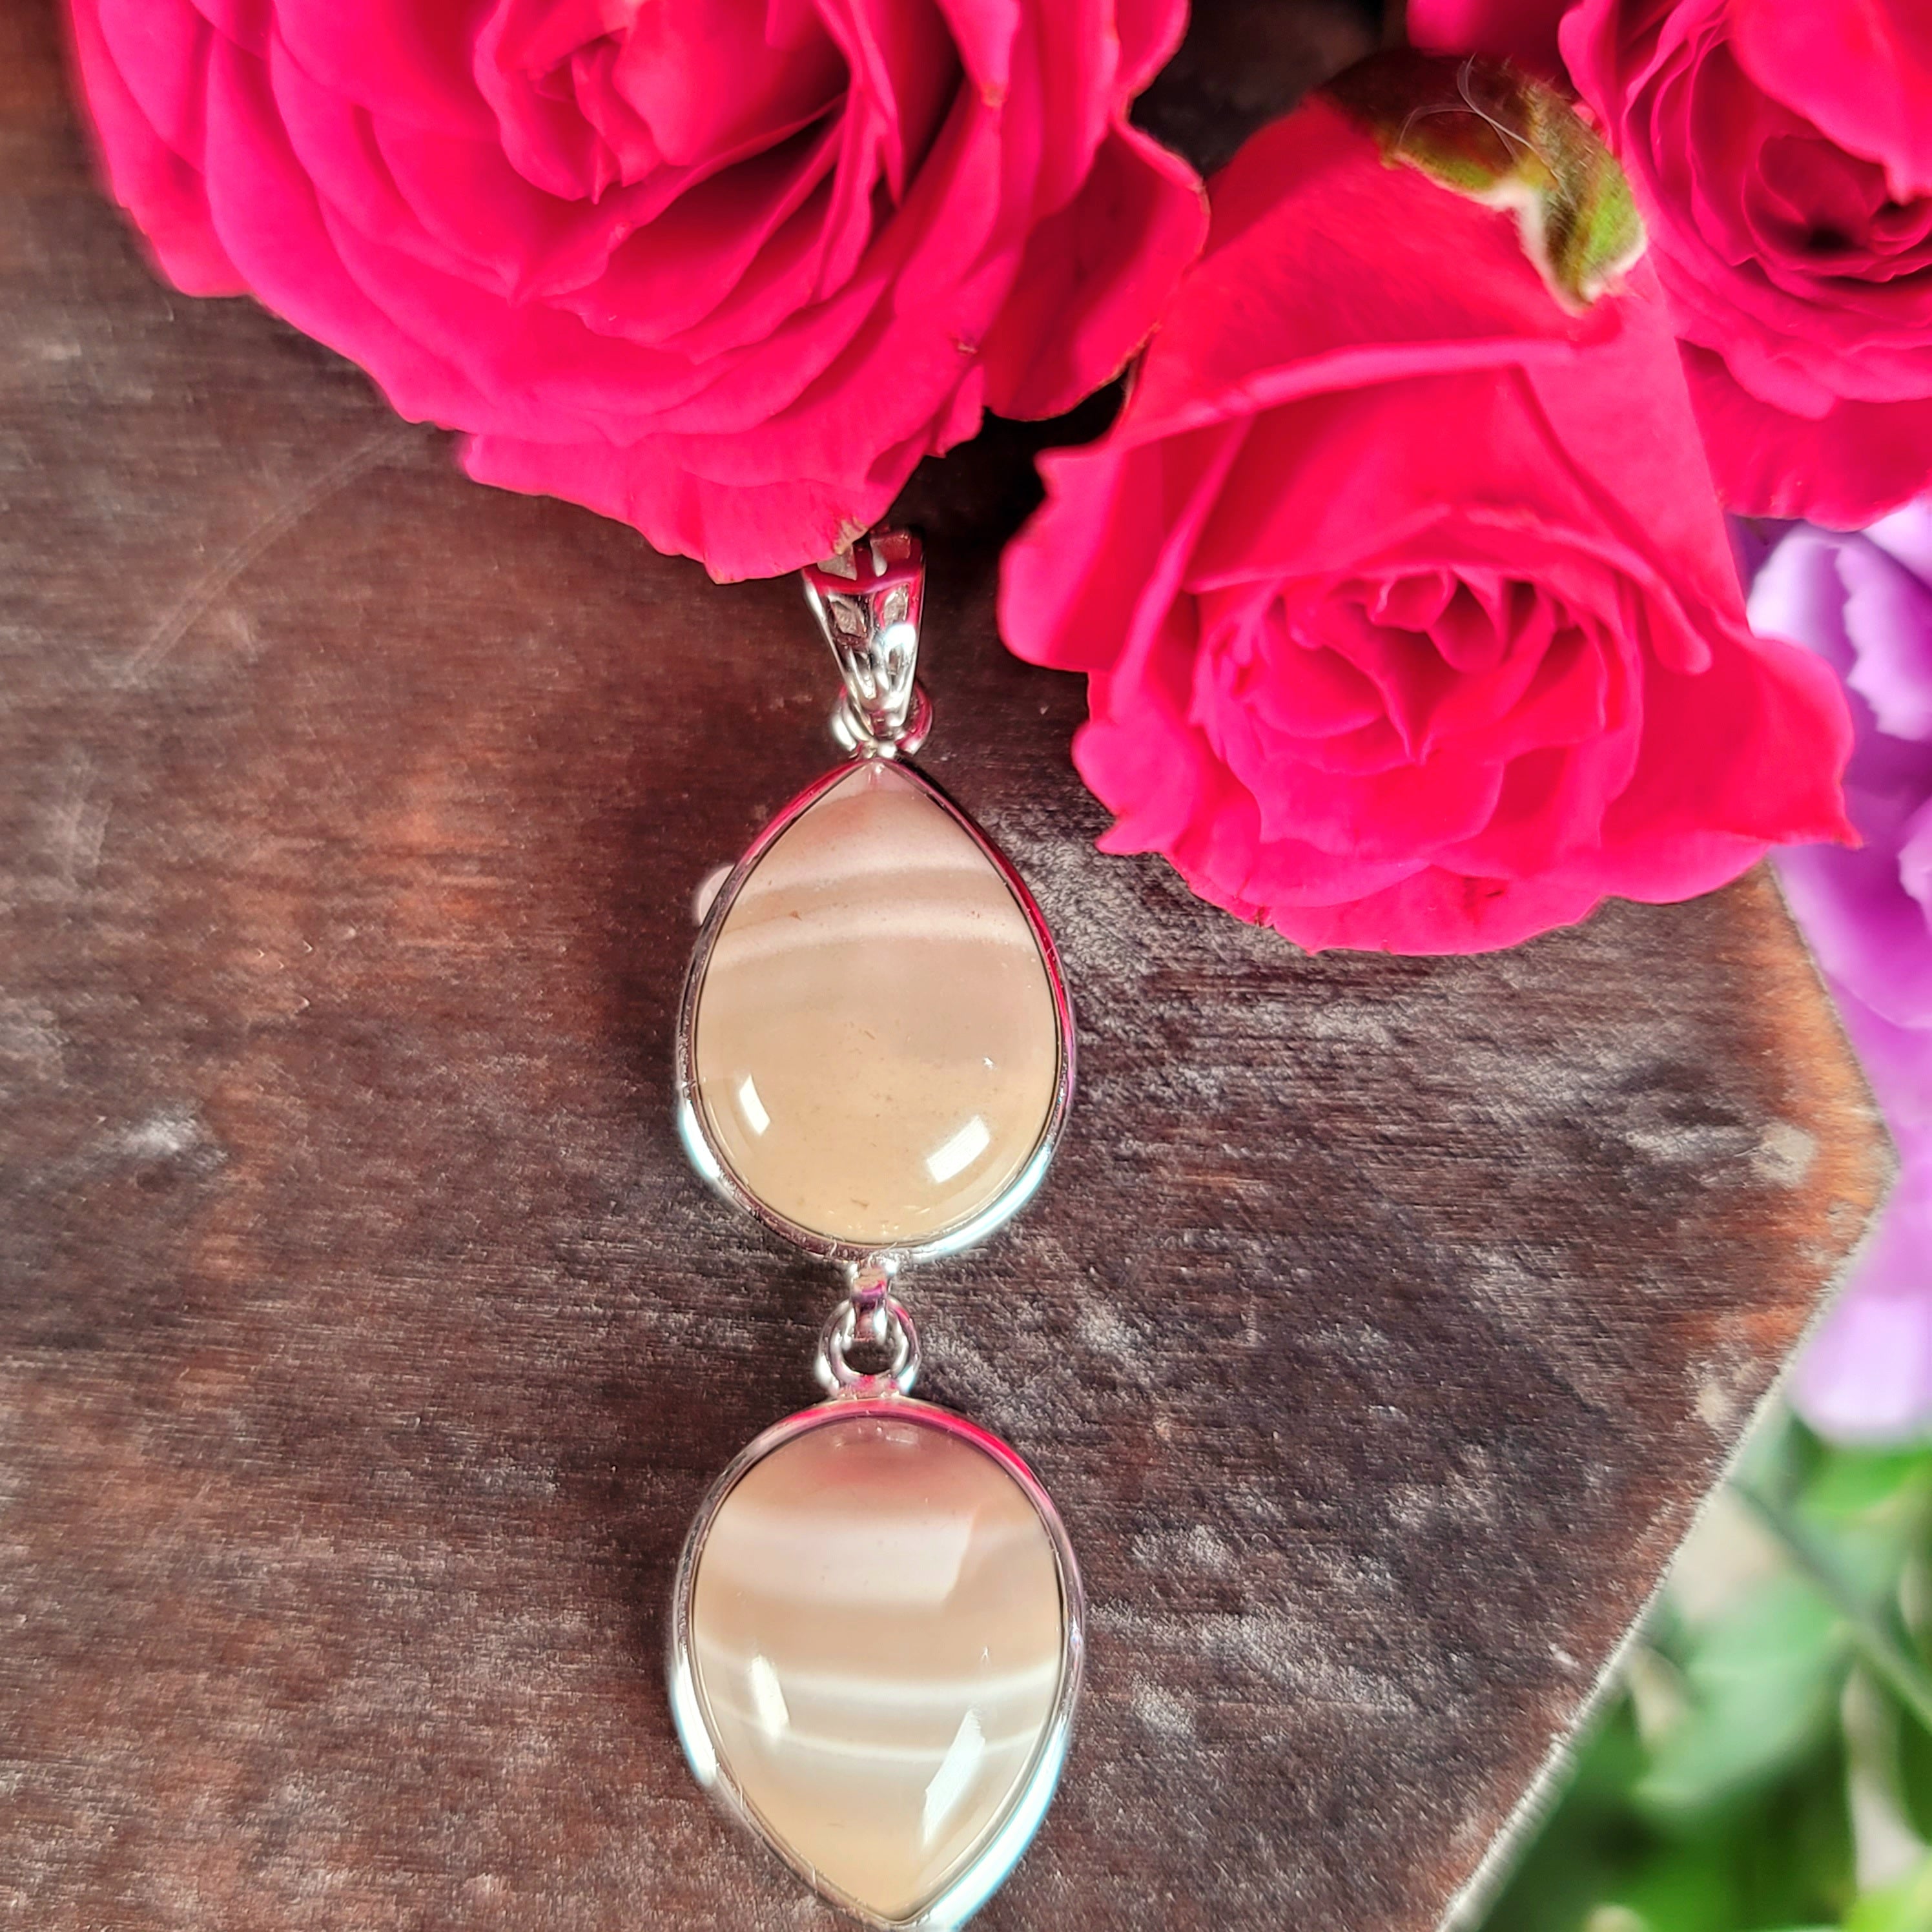 Polish Striped Flint Pendant .925 Silver for Powerful Protection Against Negative Energy